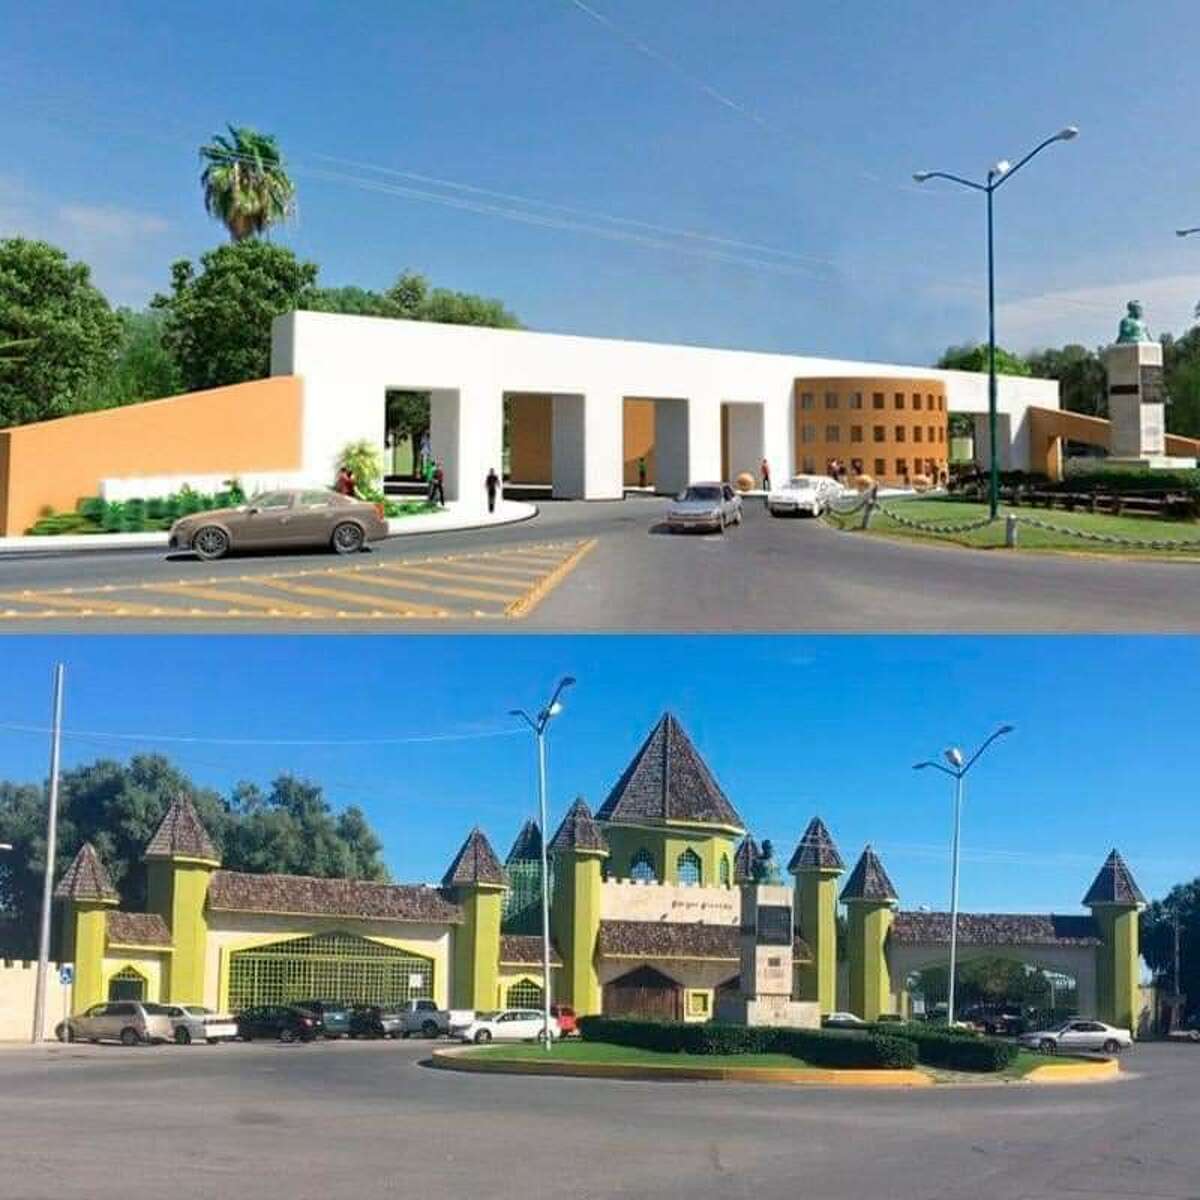 Proposed changes to Parque Viveros in Nuevo Laredo by the City of Nuevo Laredo government. The picture above features the proposed changes and the picture in the bottom is the current state of the park. 